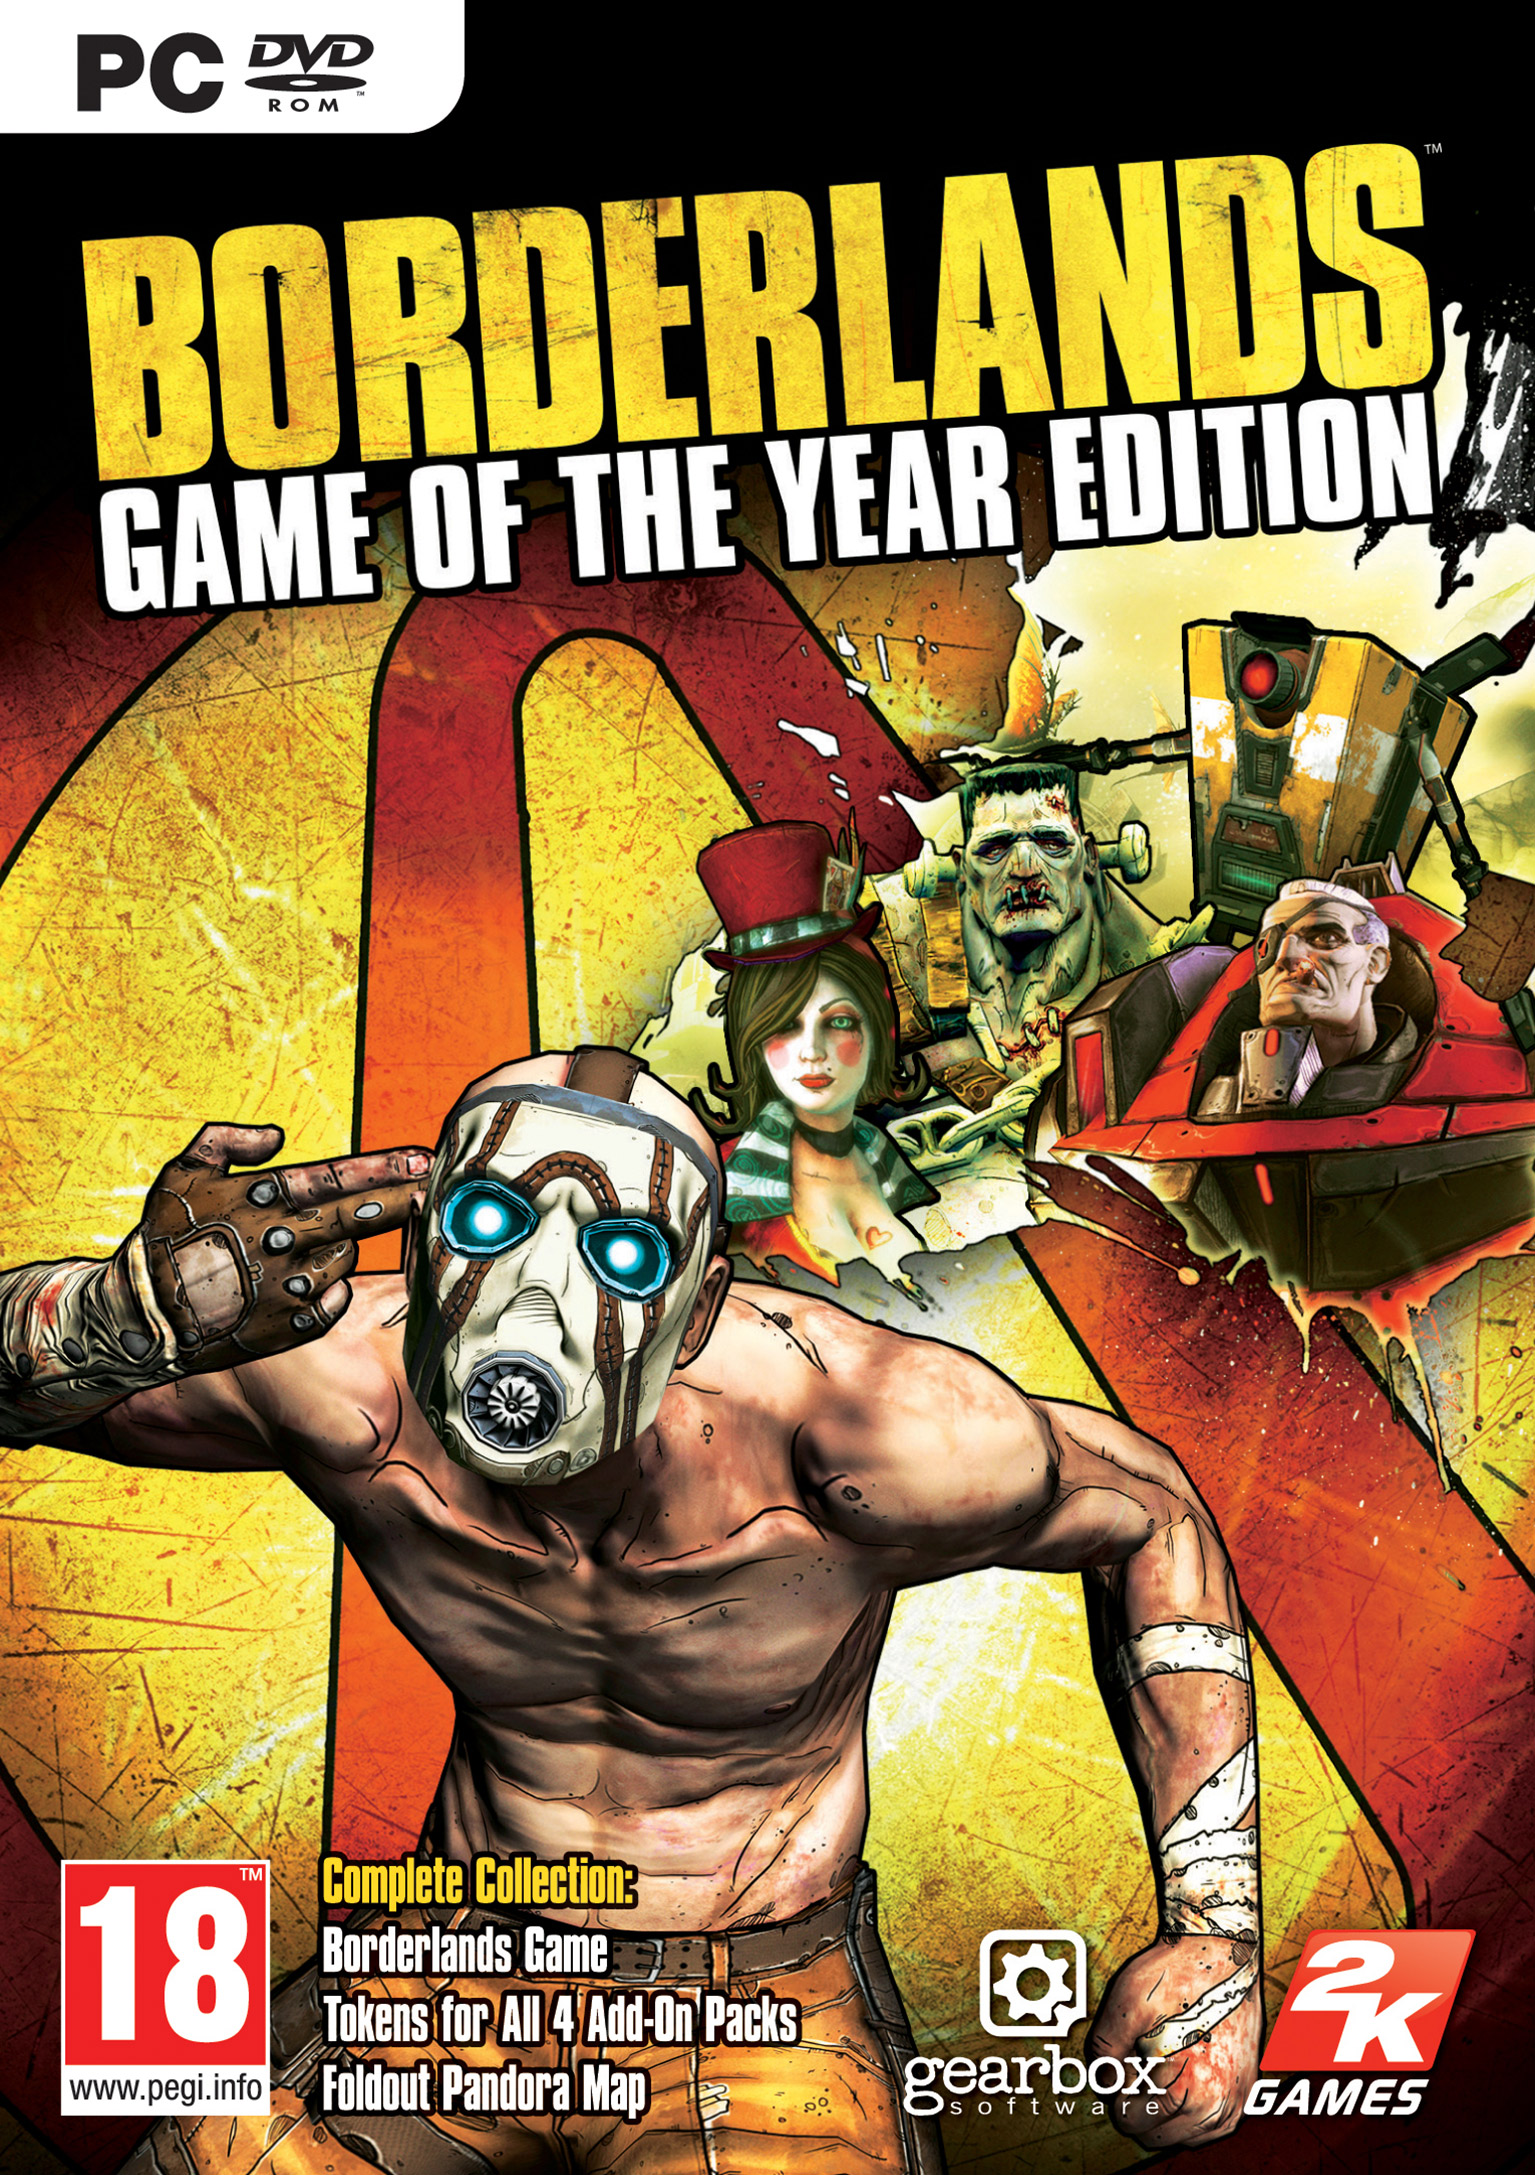 Borderlands: Game of the Year Edition - predn DVD obal